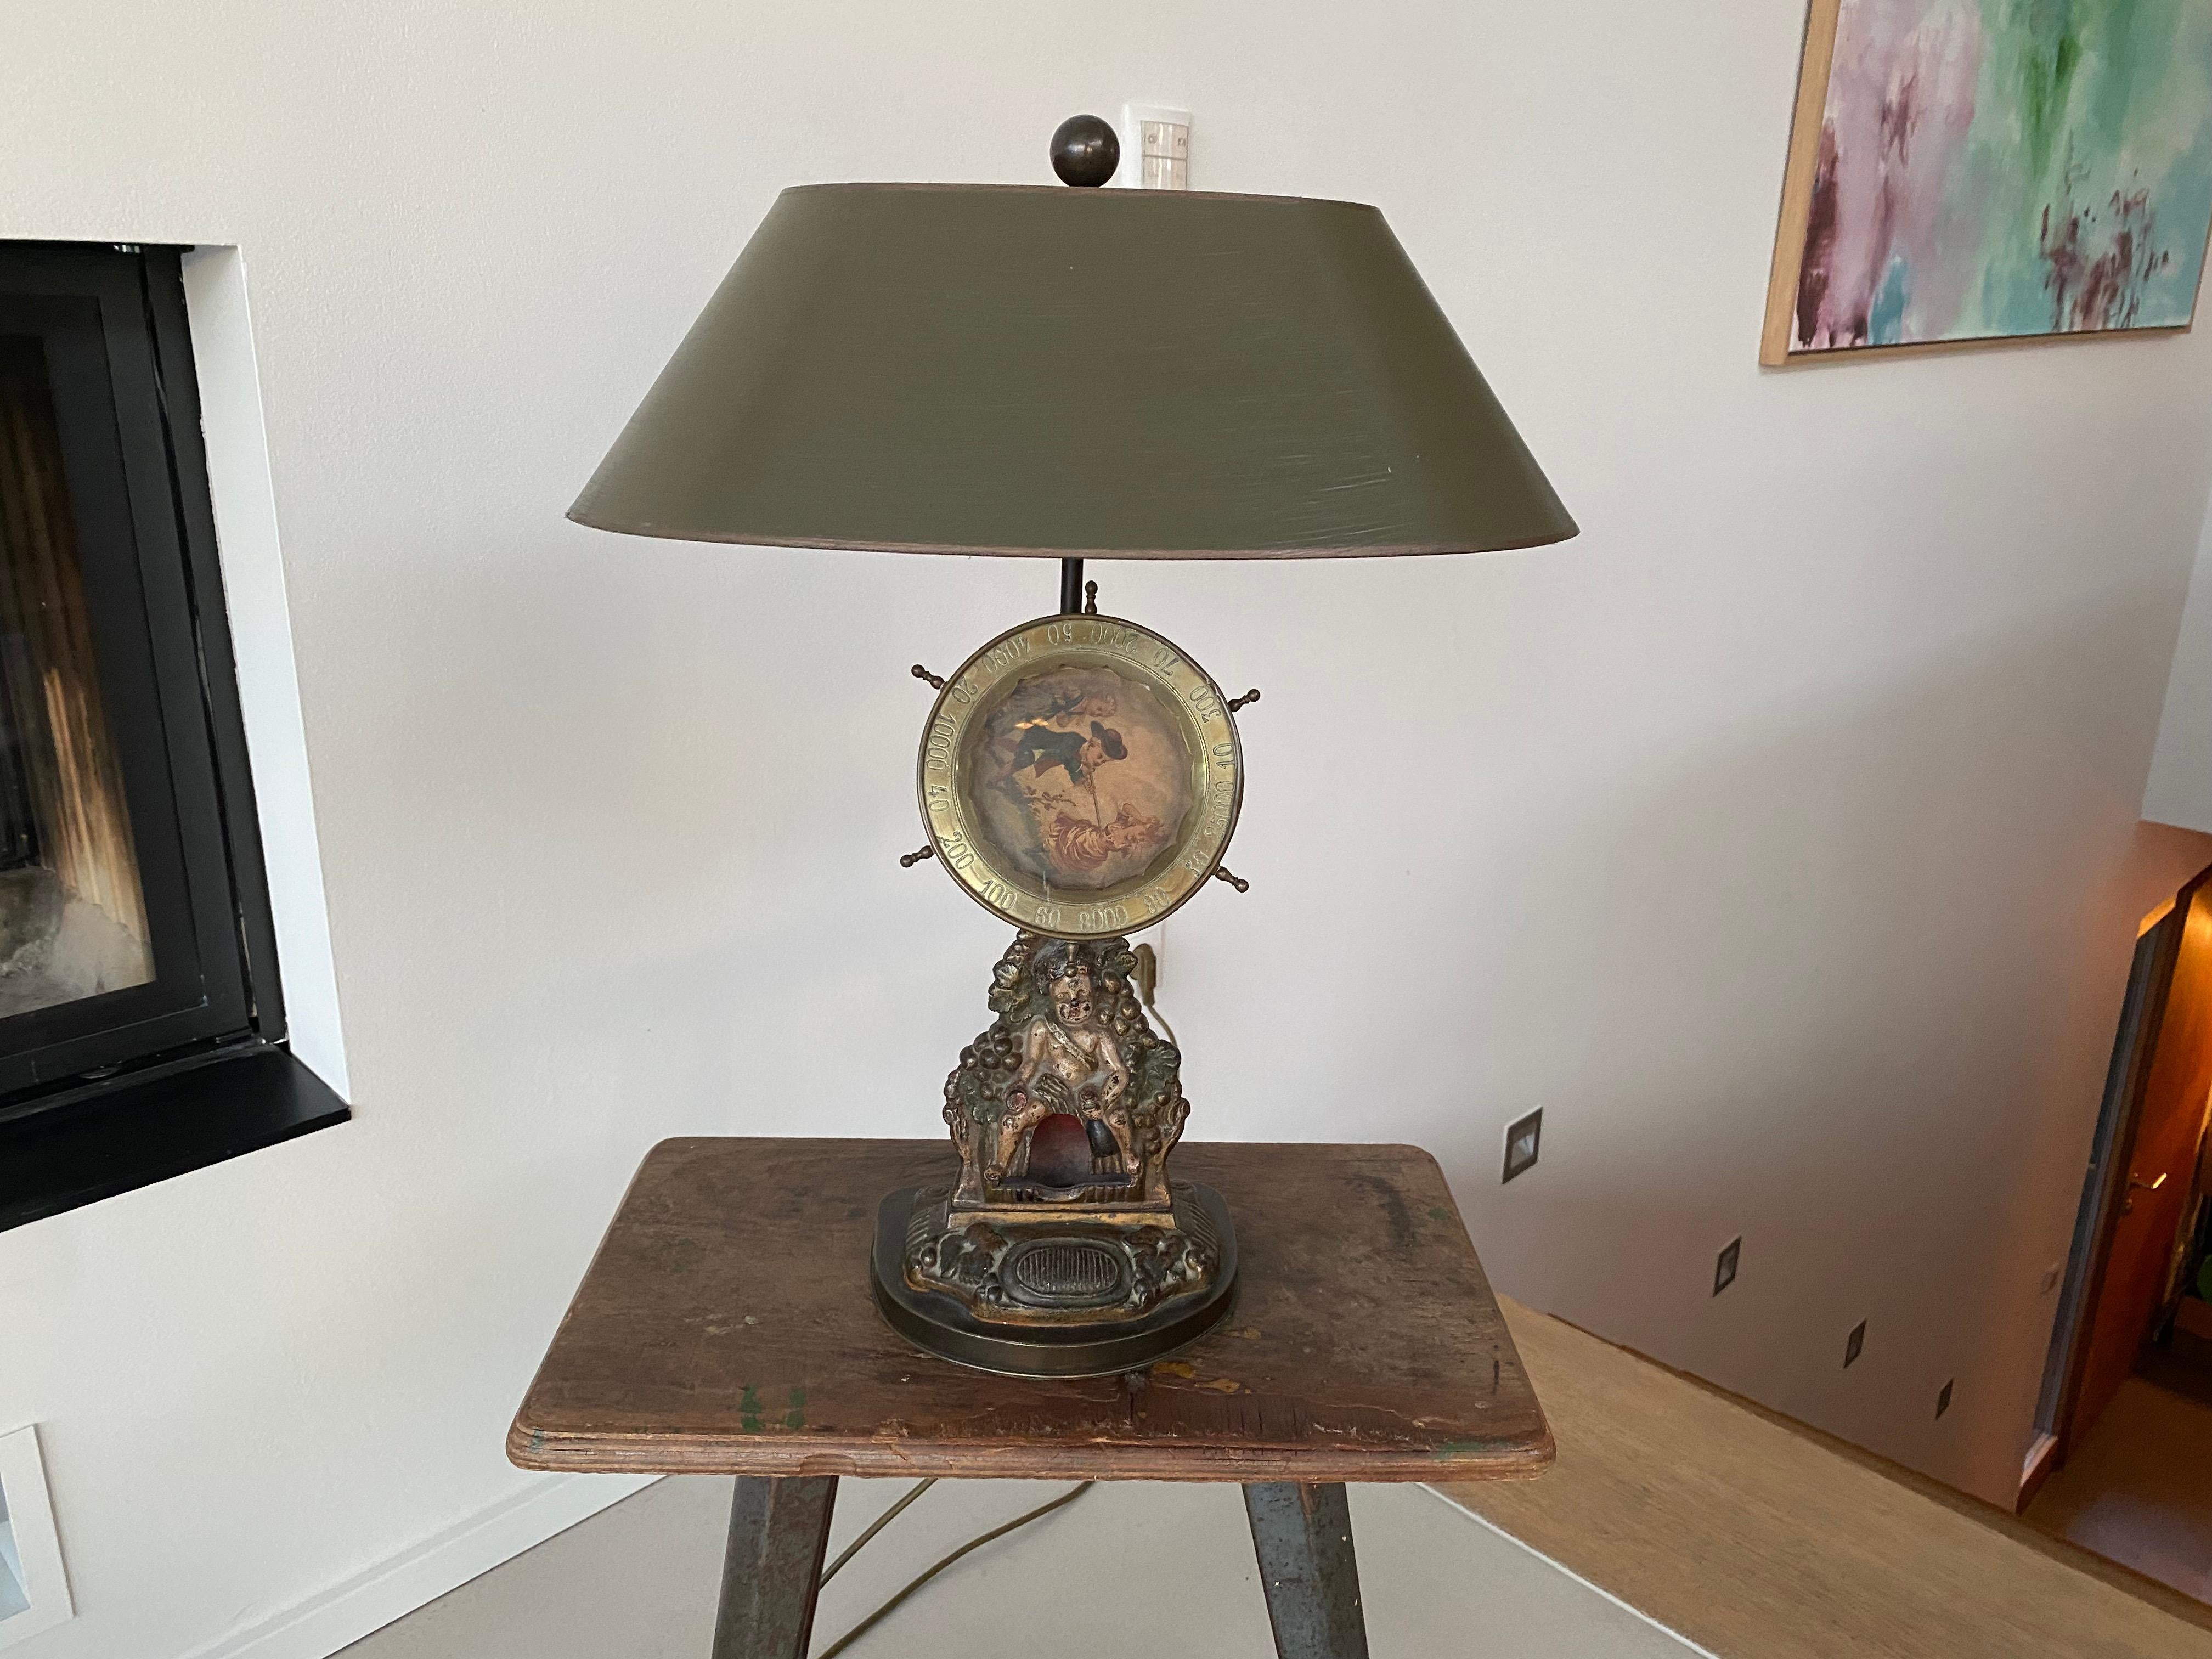 Metal Decorative Table Lamp with Cast-Iron Match Dispenser and Hand-Painted Lampshade